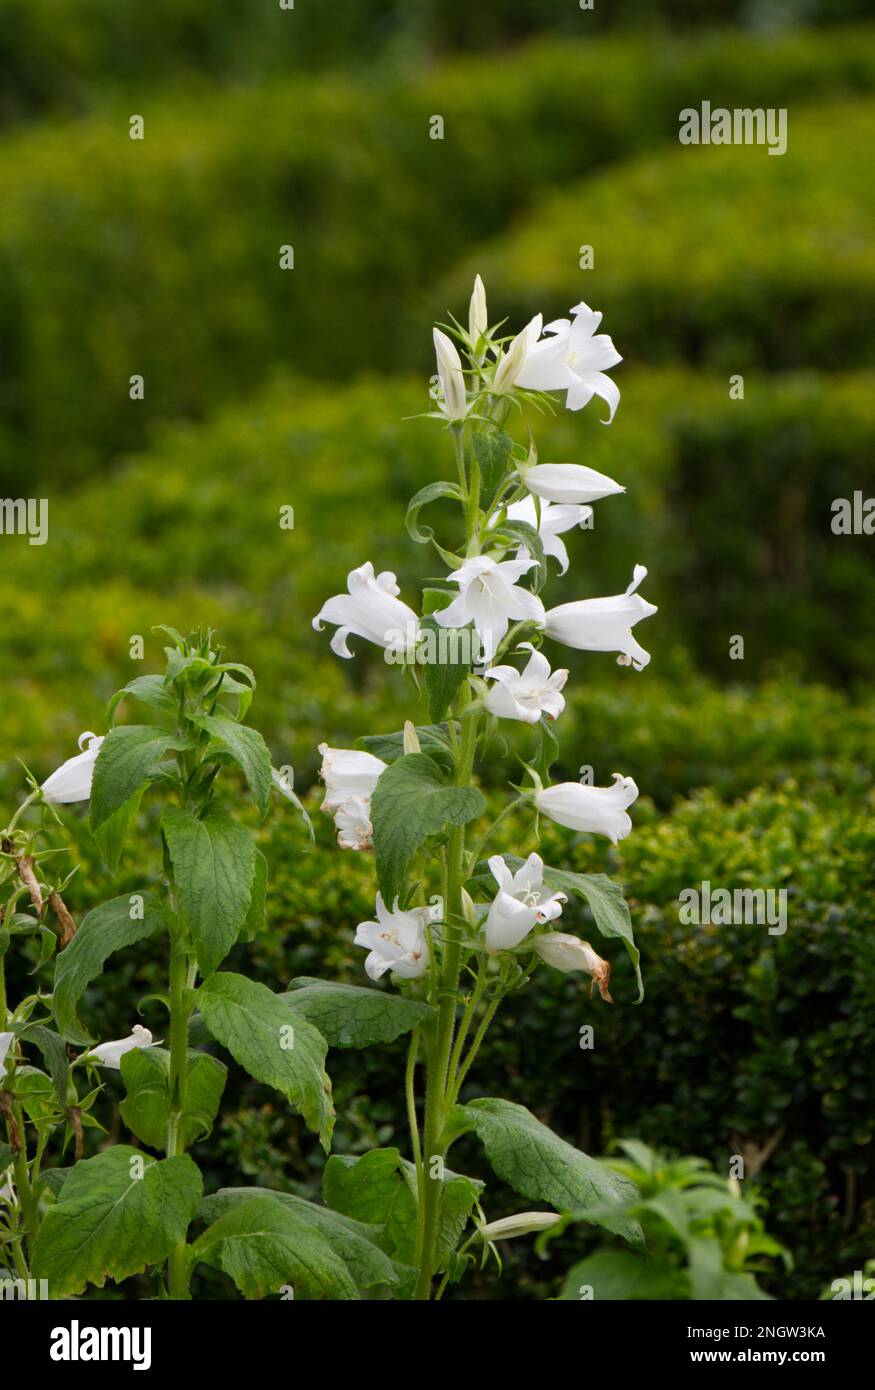 Pristine white autumn flowers of giant bellflower campanula latifolia alba against background of clipped box hedging, Buxus sempervirens in UK garden Stock Photo